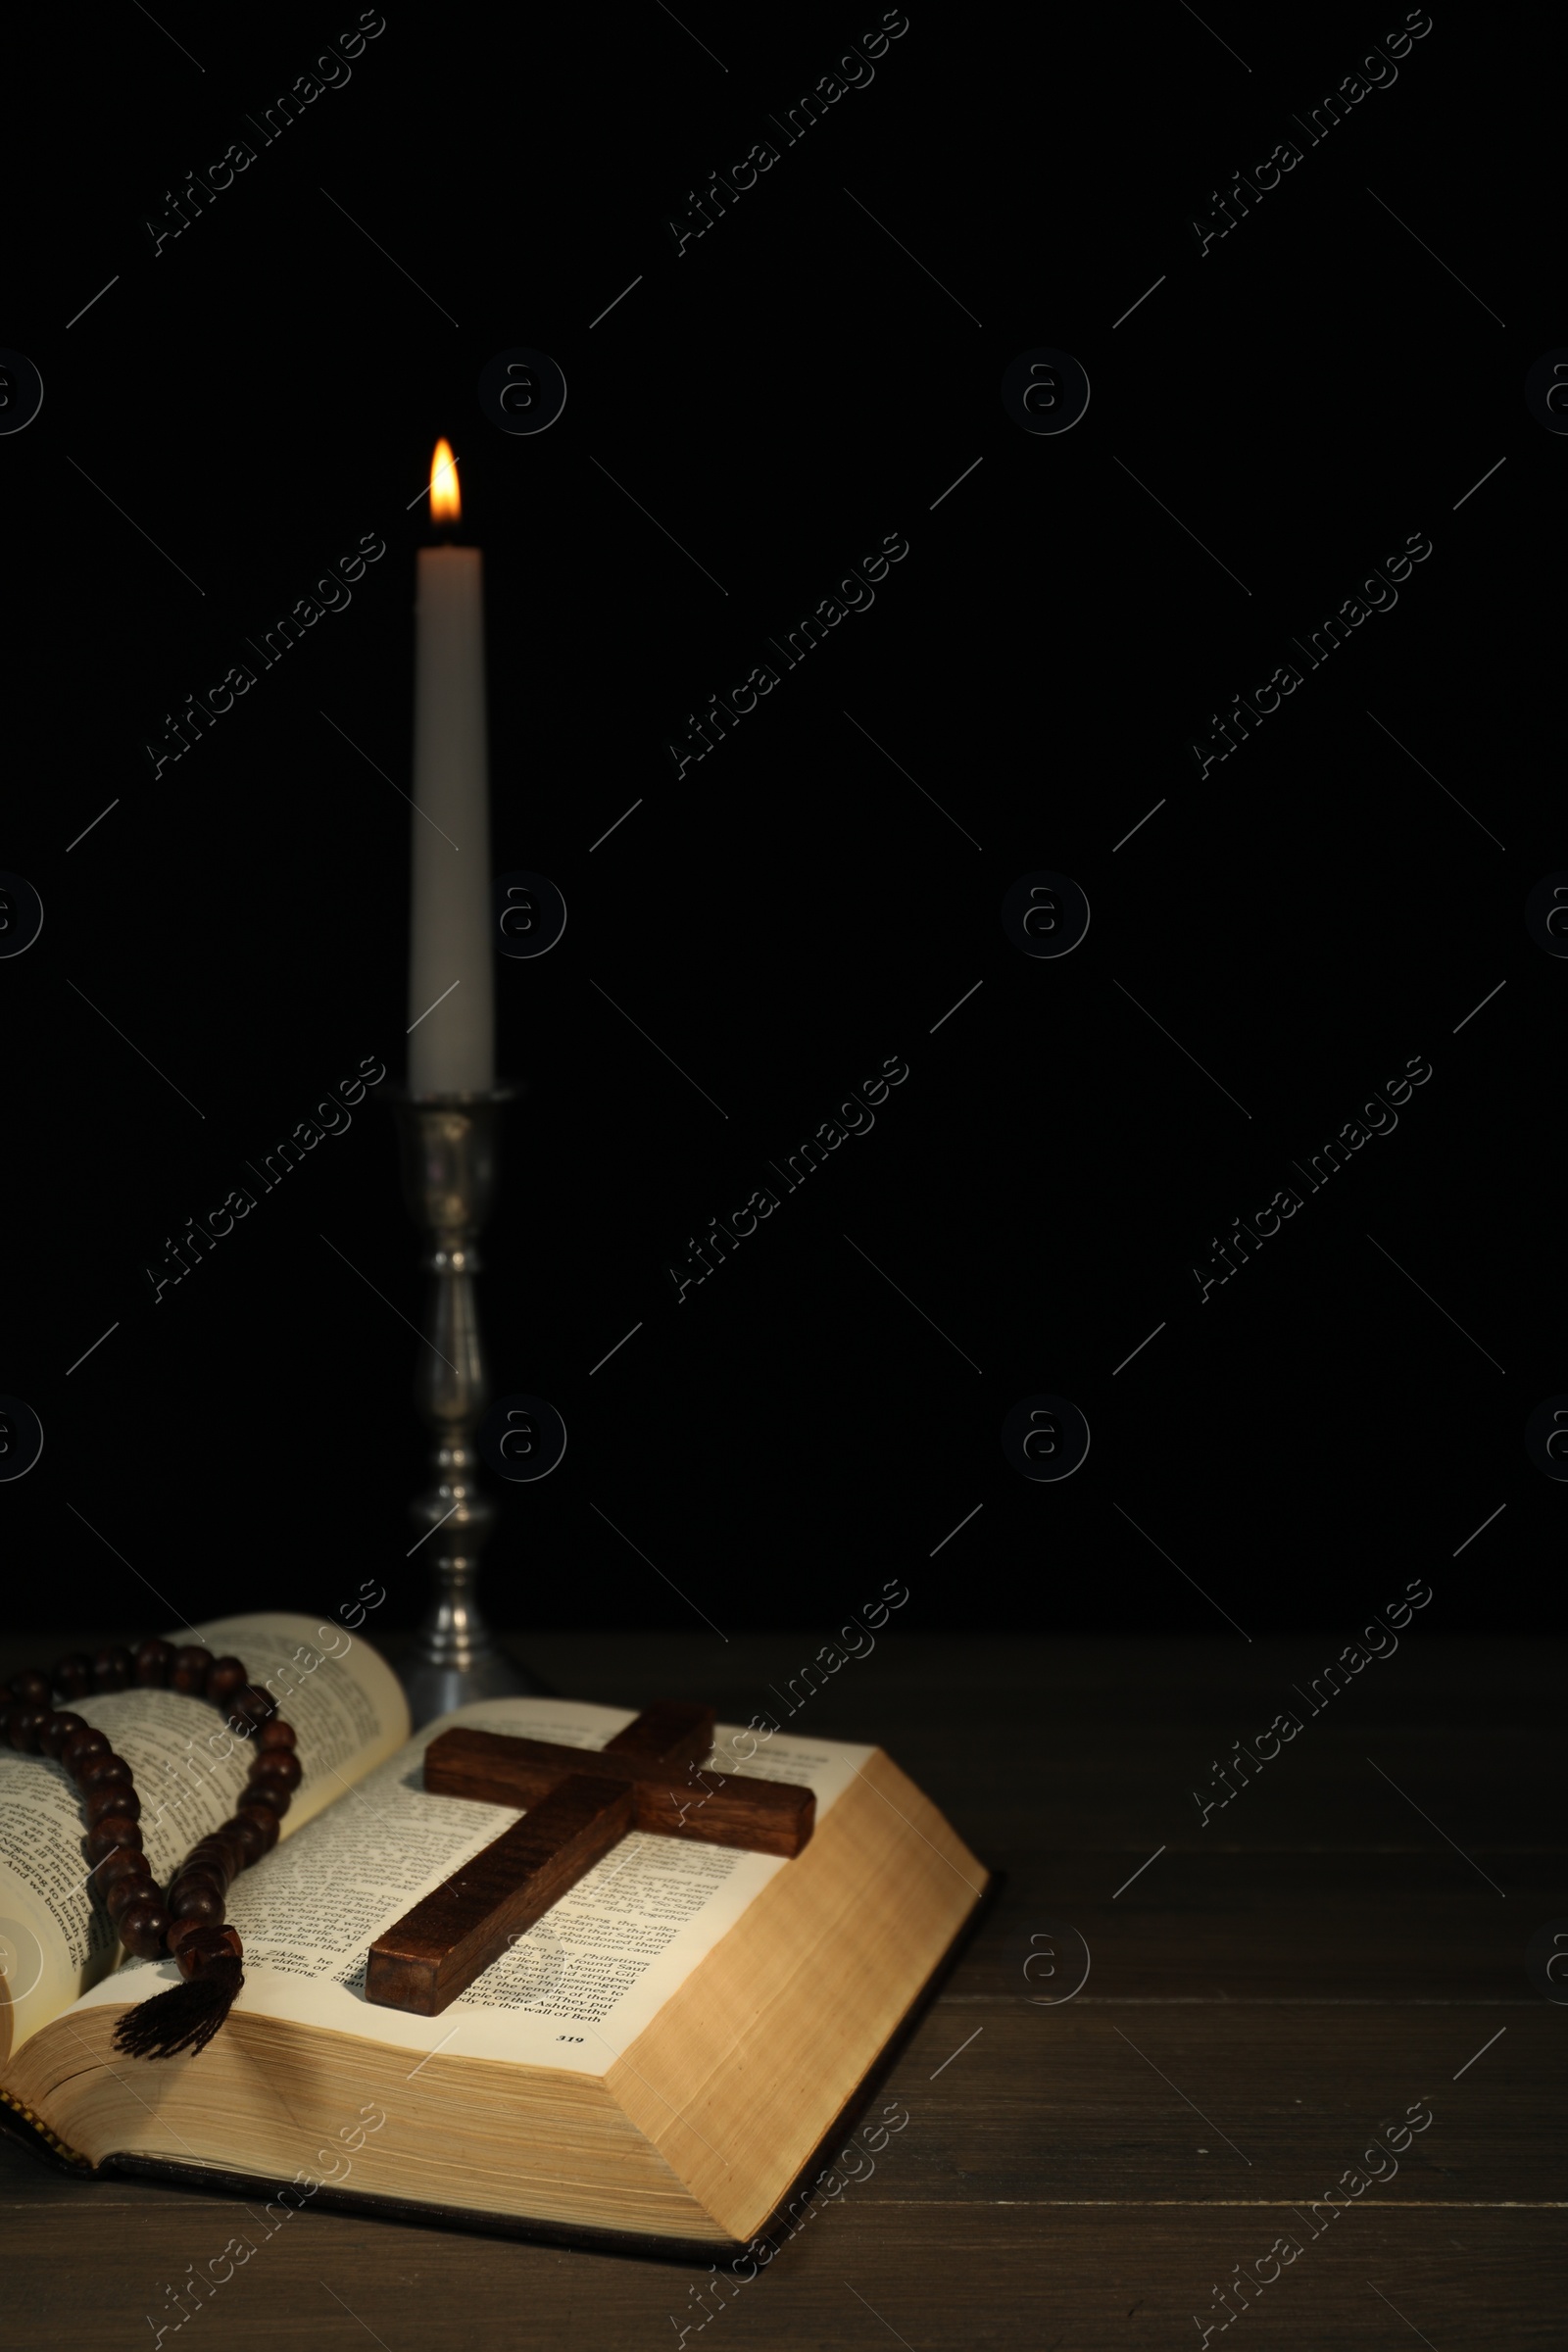 Photo of Church candle, Bible, rosary beads and cross on wooden table against black background, space for text